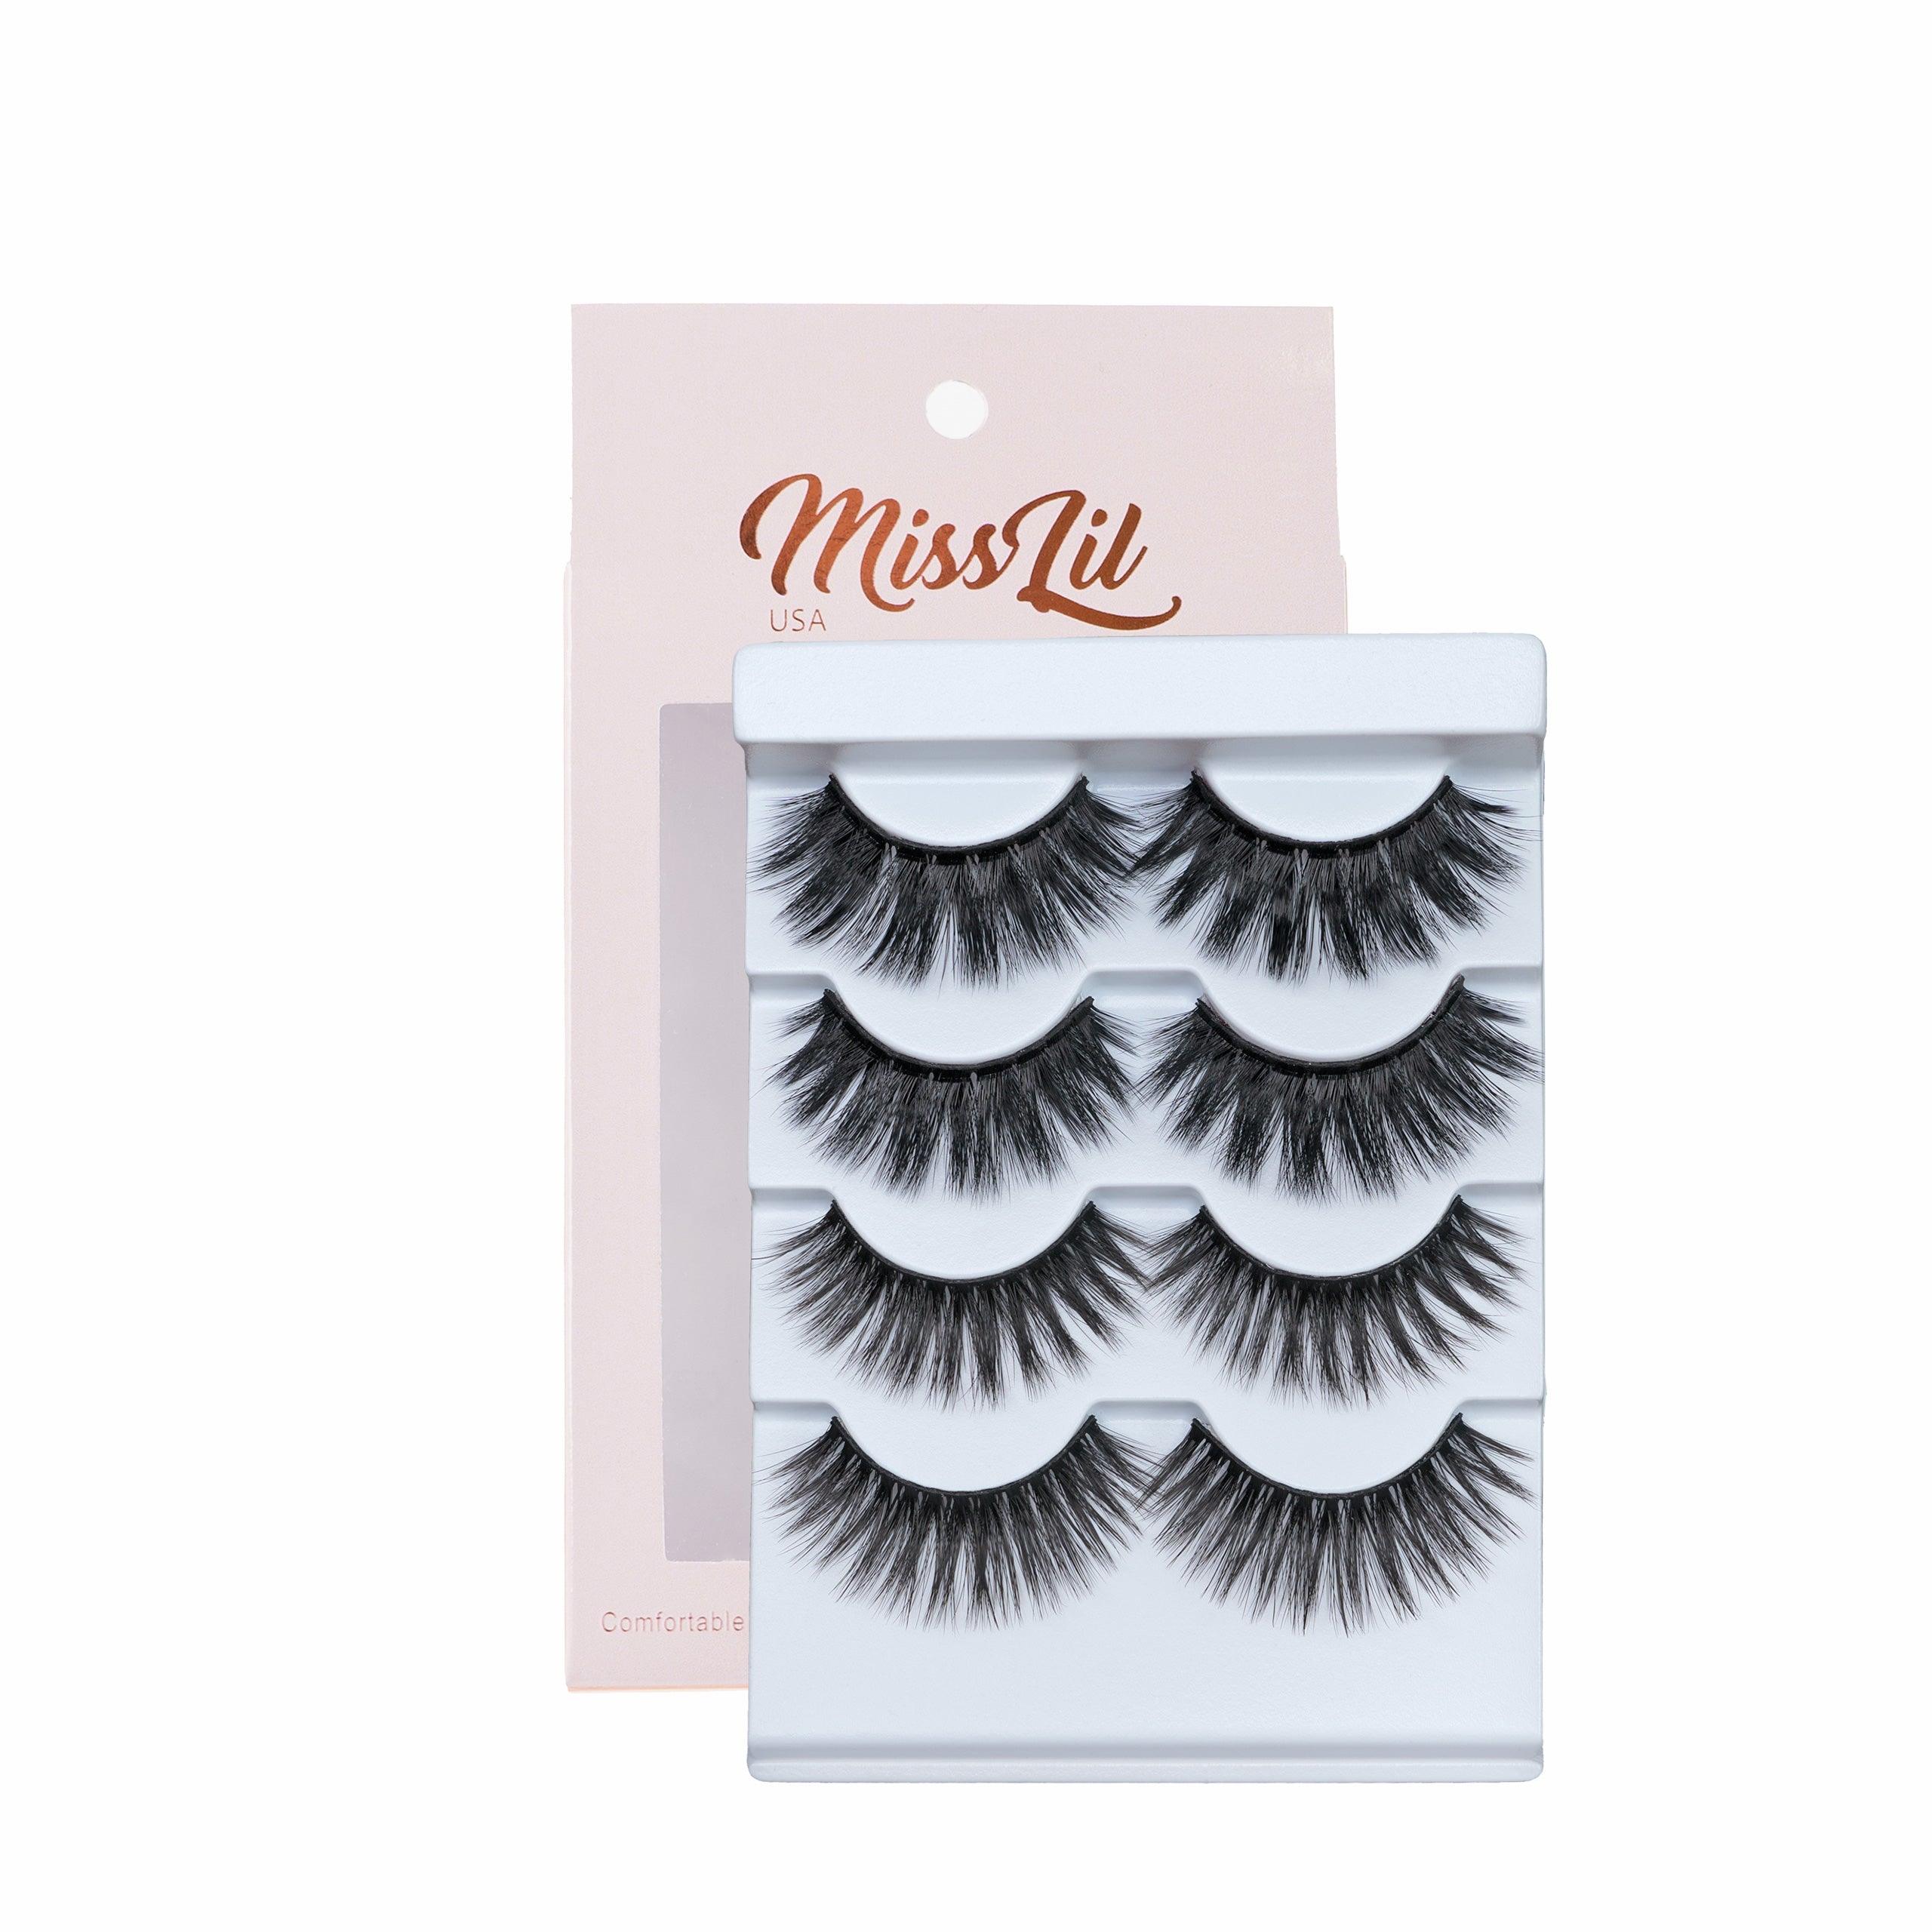 4 Pairs Lashes Classic Collection #16 (Pack of 12) - Miss Lil USA Wholesale